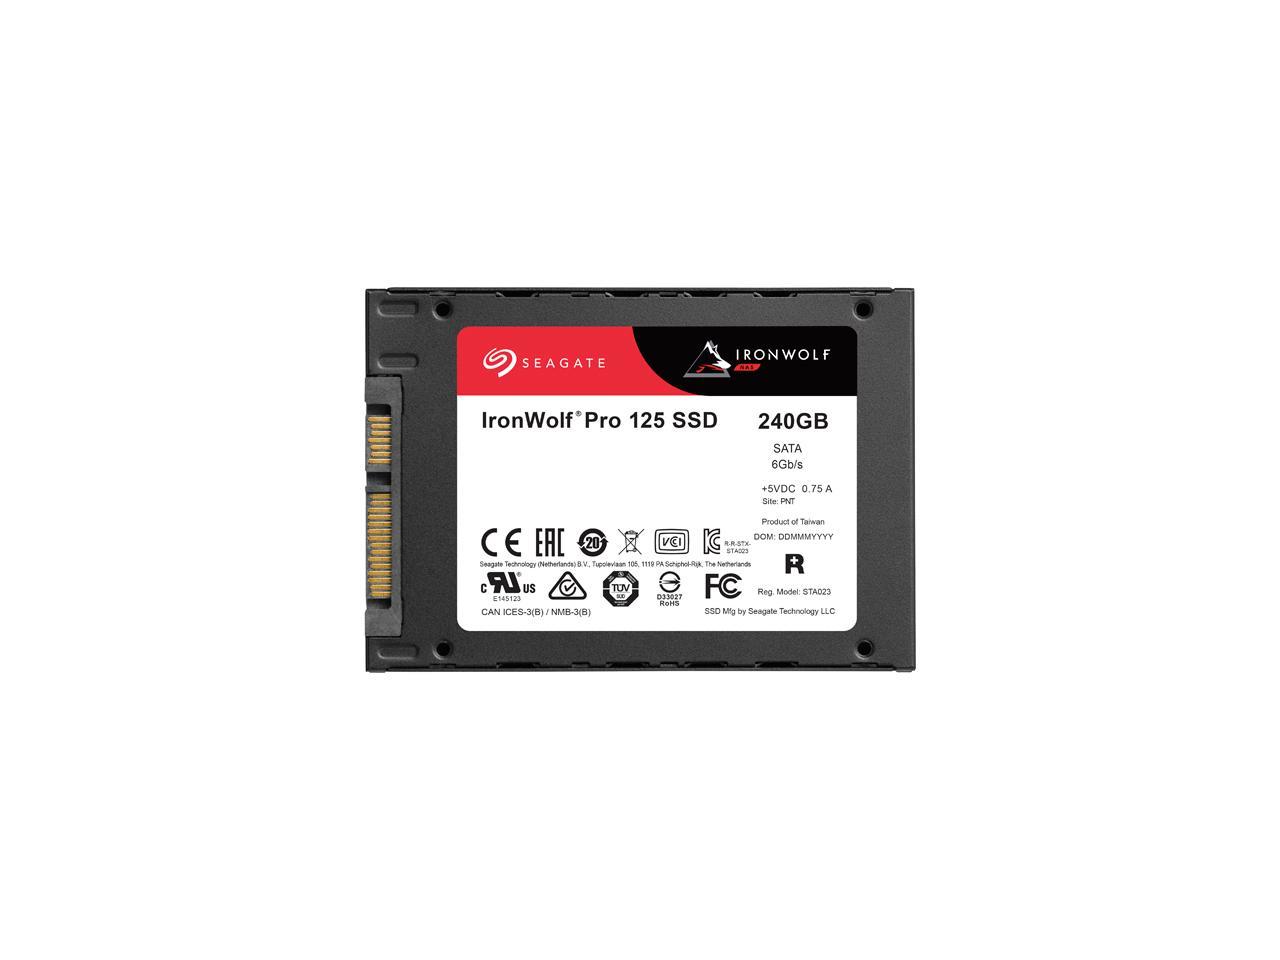 Seagate IronWolf Pro 125 SSD 240GB NAS Internal Solid State Drive - 2.5 Inch SATA 6Gb/s Speeds up to 545 MB/s, 1 DWPD Endurance and 24x7 Performance for Creative Pro, and SMB (ZA240NX1A001)